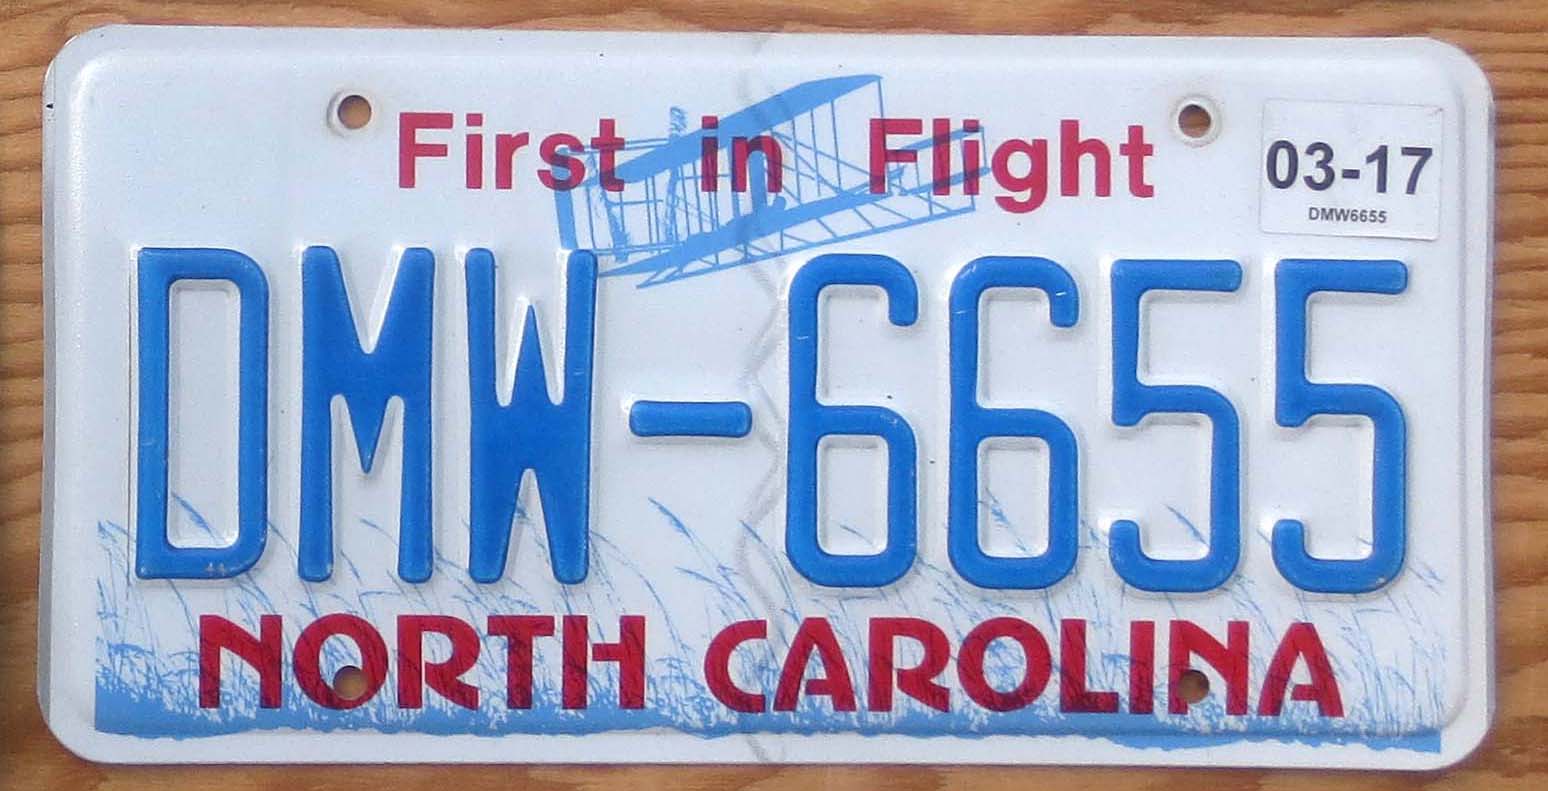 North Carolina Product categories Automobile License Plate Store